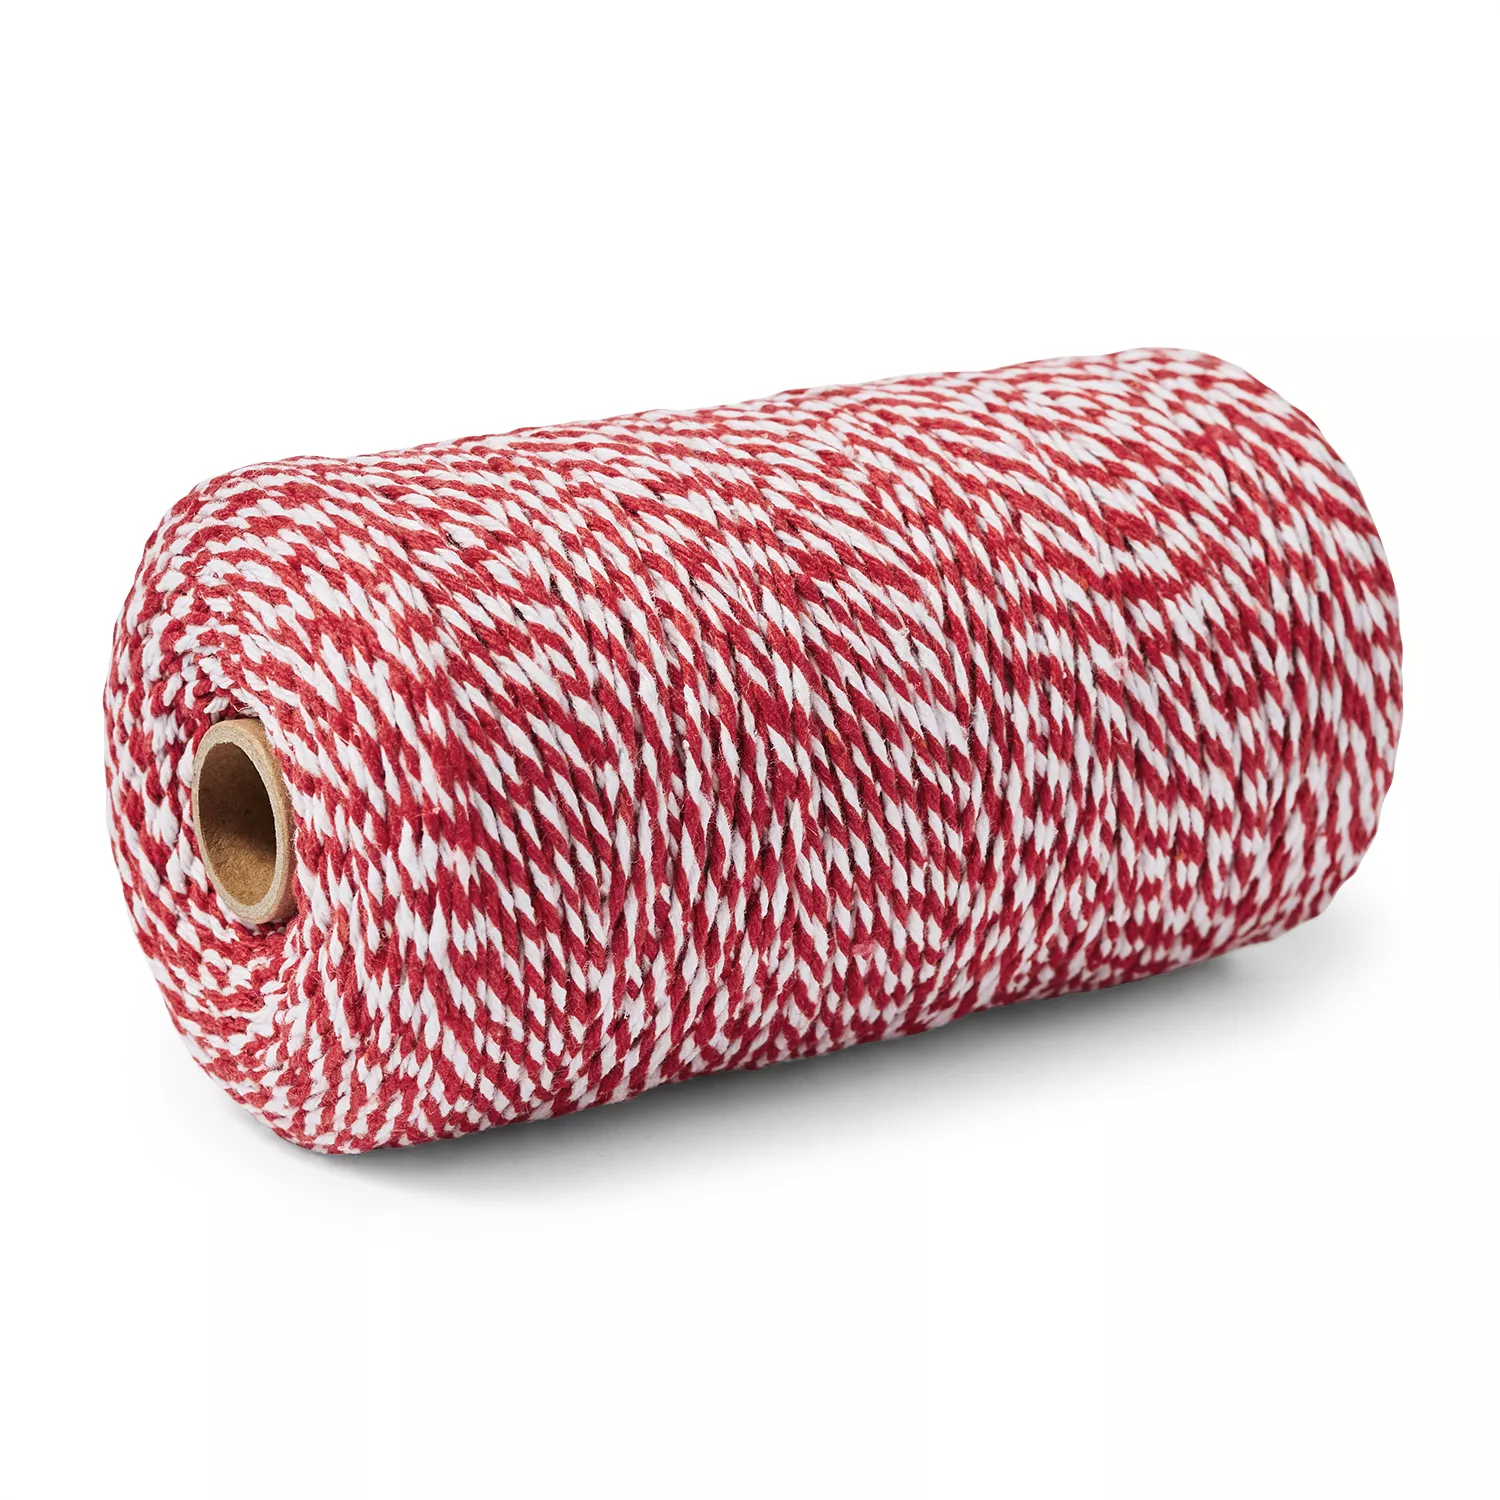 Bakers Twine Red and White, Cotton Twine Packing String for Gardening,  Decorati